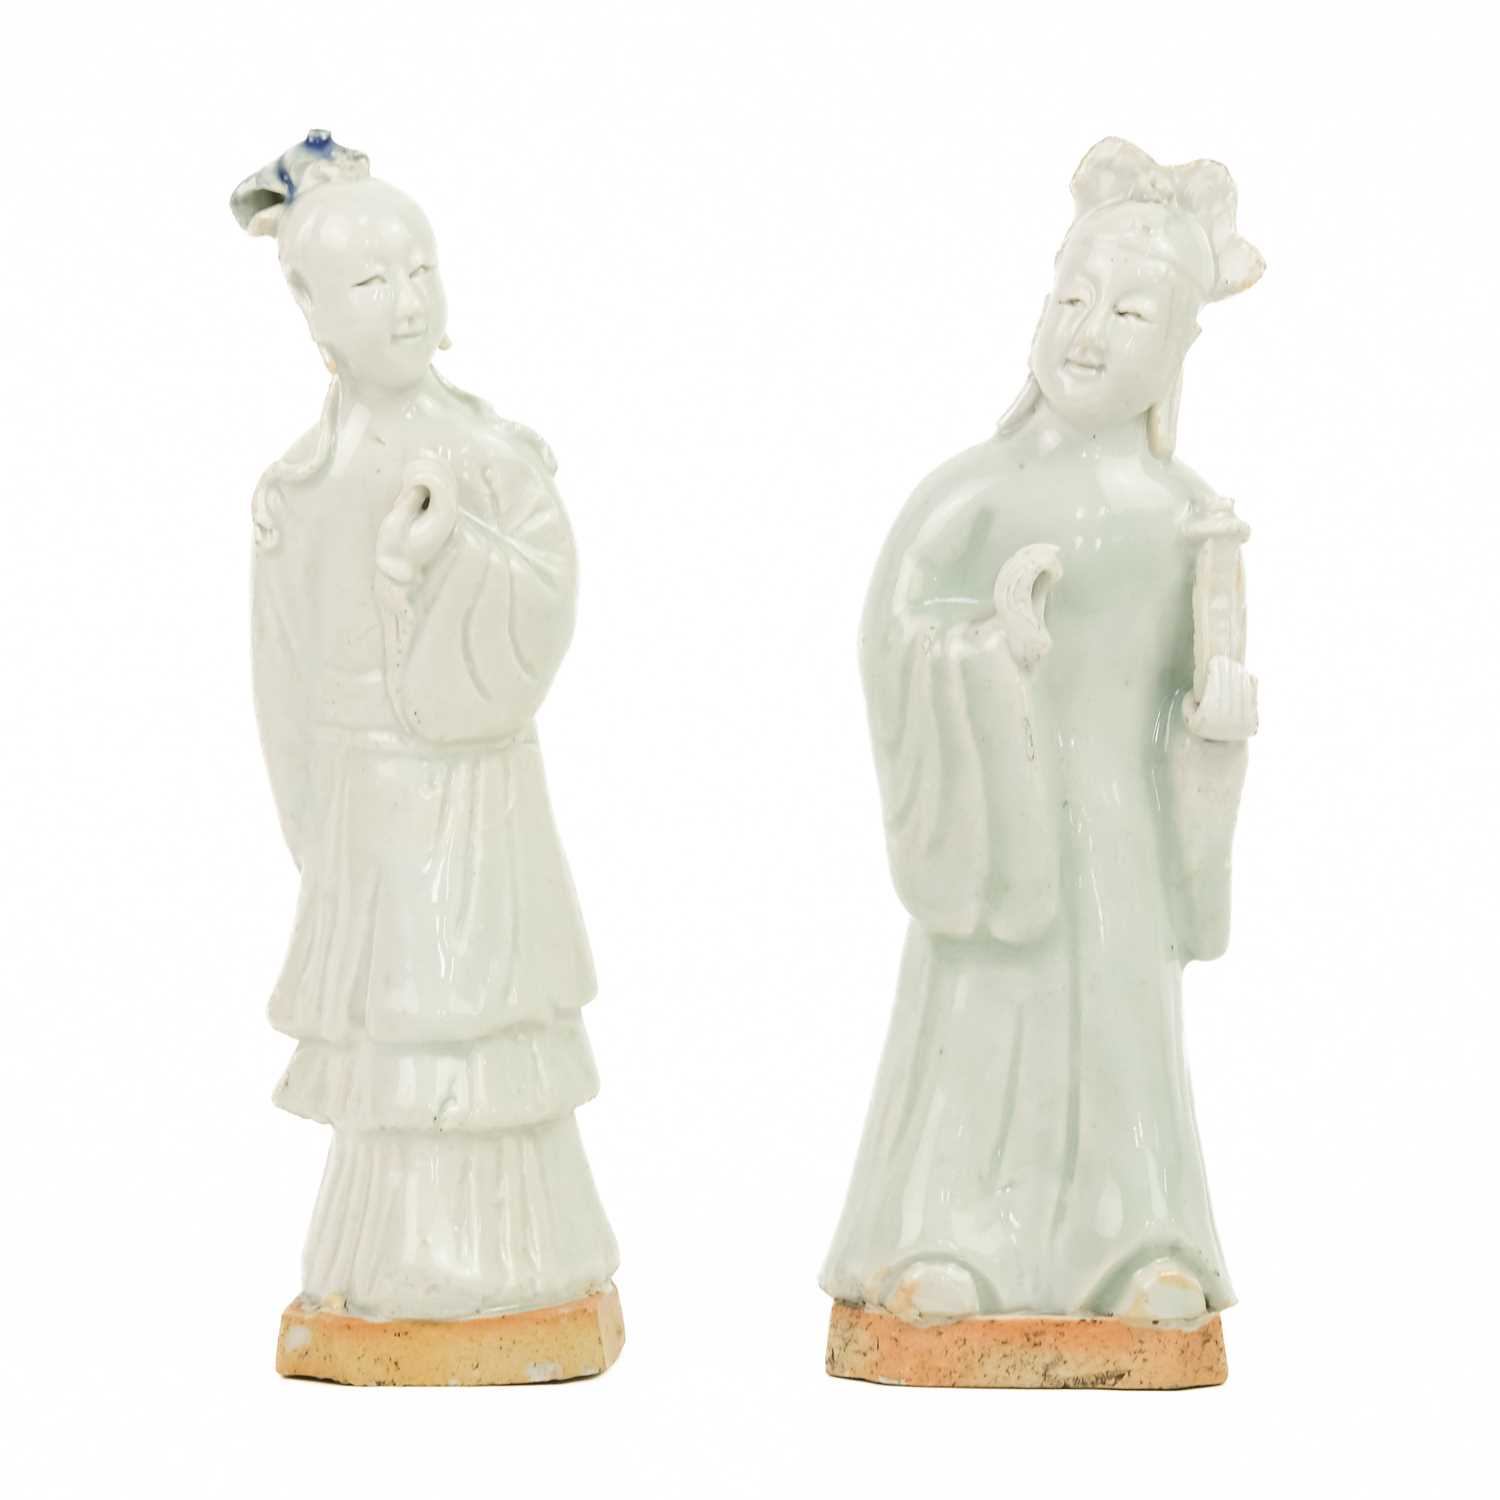 A pair of Chinese celadon figures of attendants, 19th century.